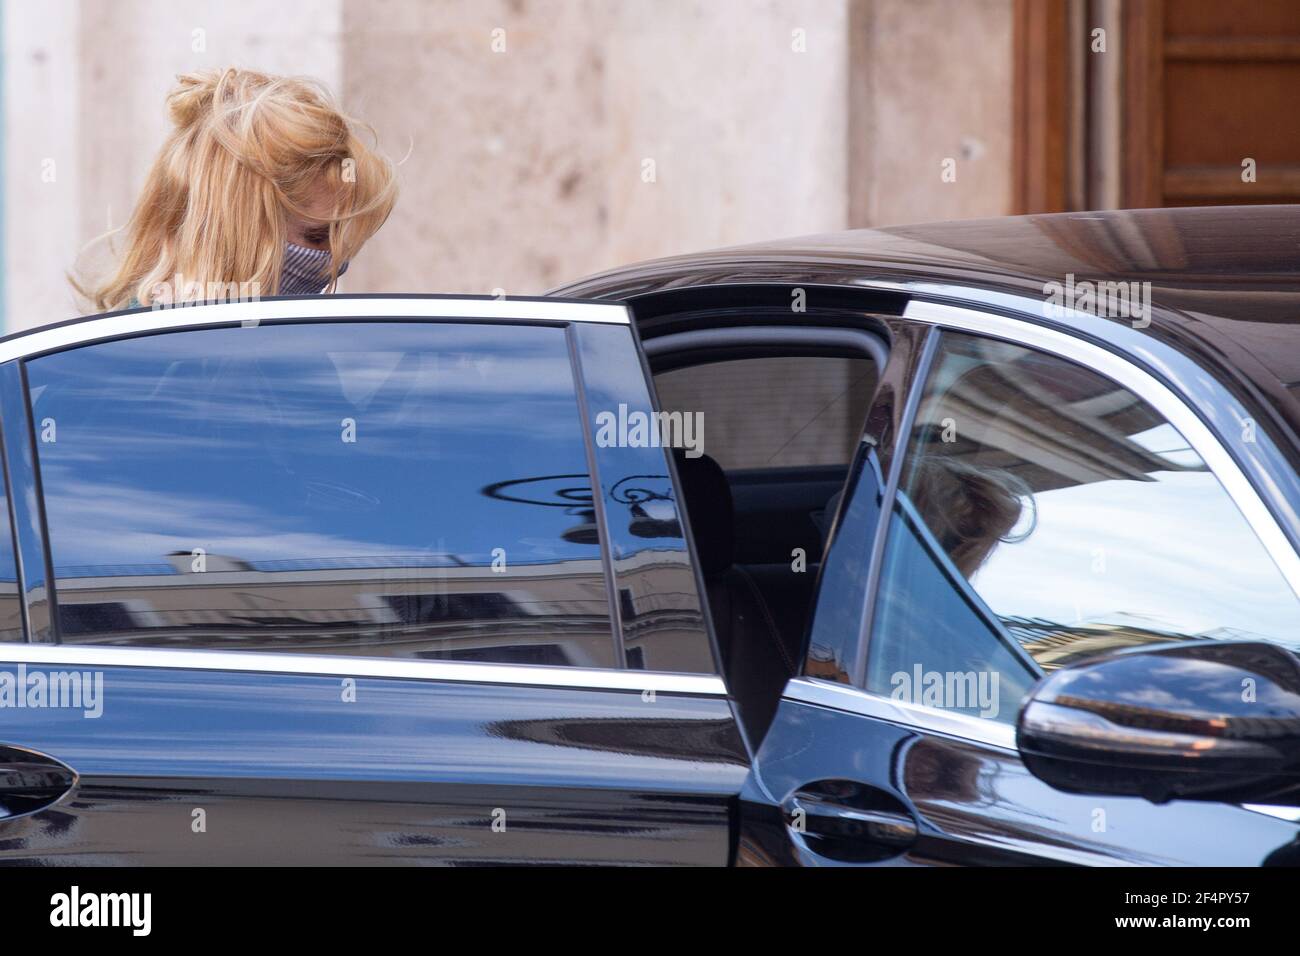 Rome, Italy. 22nd Mar, 2021. British actress Kelly Reilly gets into the car after finishing shooting the film (Photo by Matteo Nardone/Pacific Press) Credit: Pacific Press Media Production Corp./Alamy Live News Stock Photo